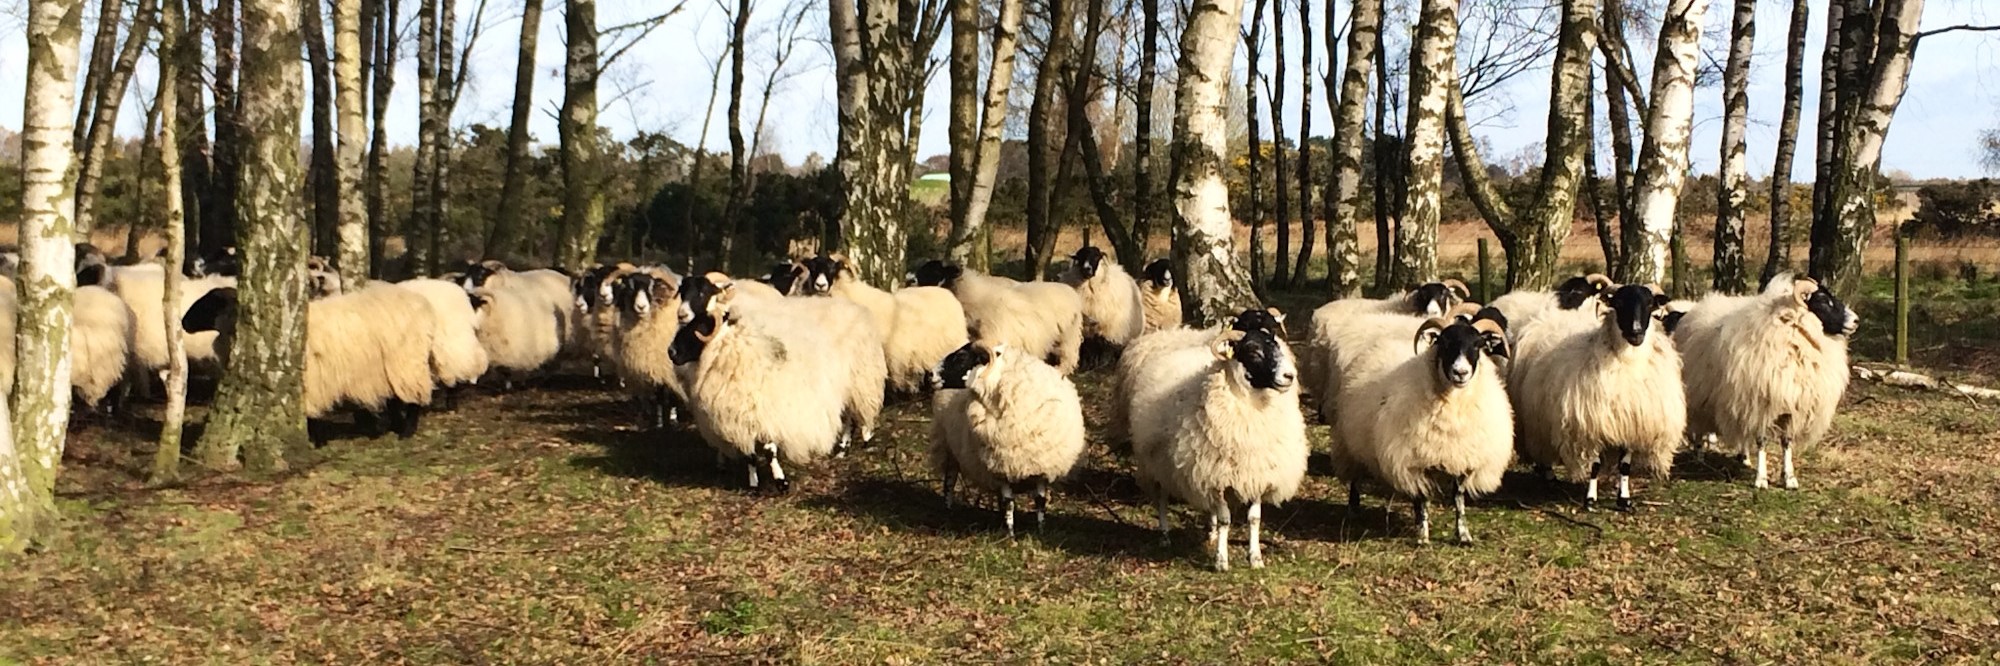 A group of sheep stand on the edge of some woodland